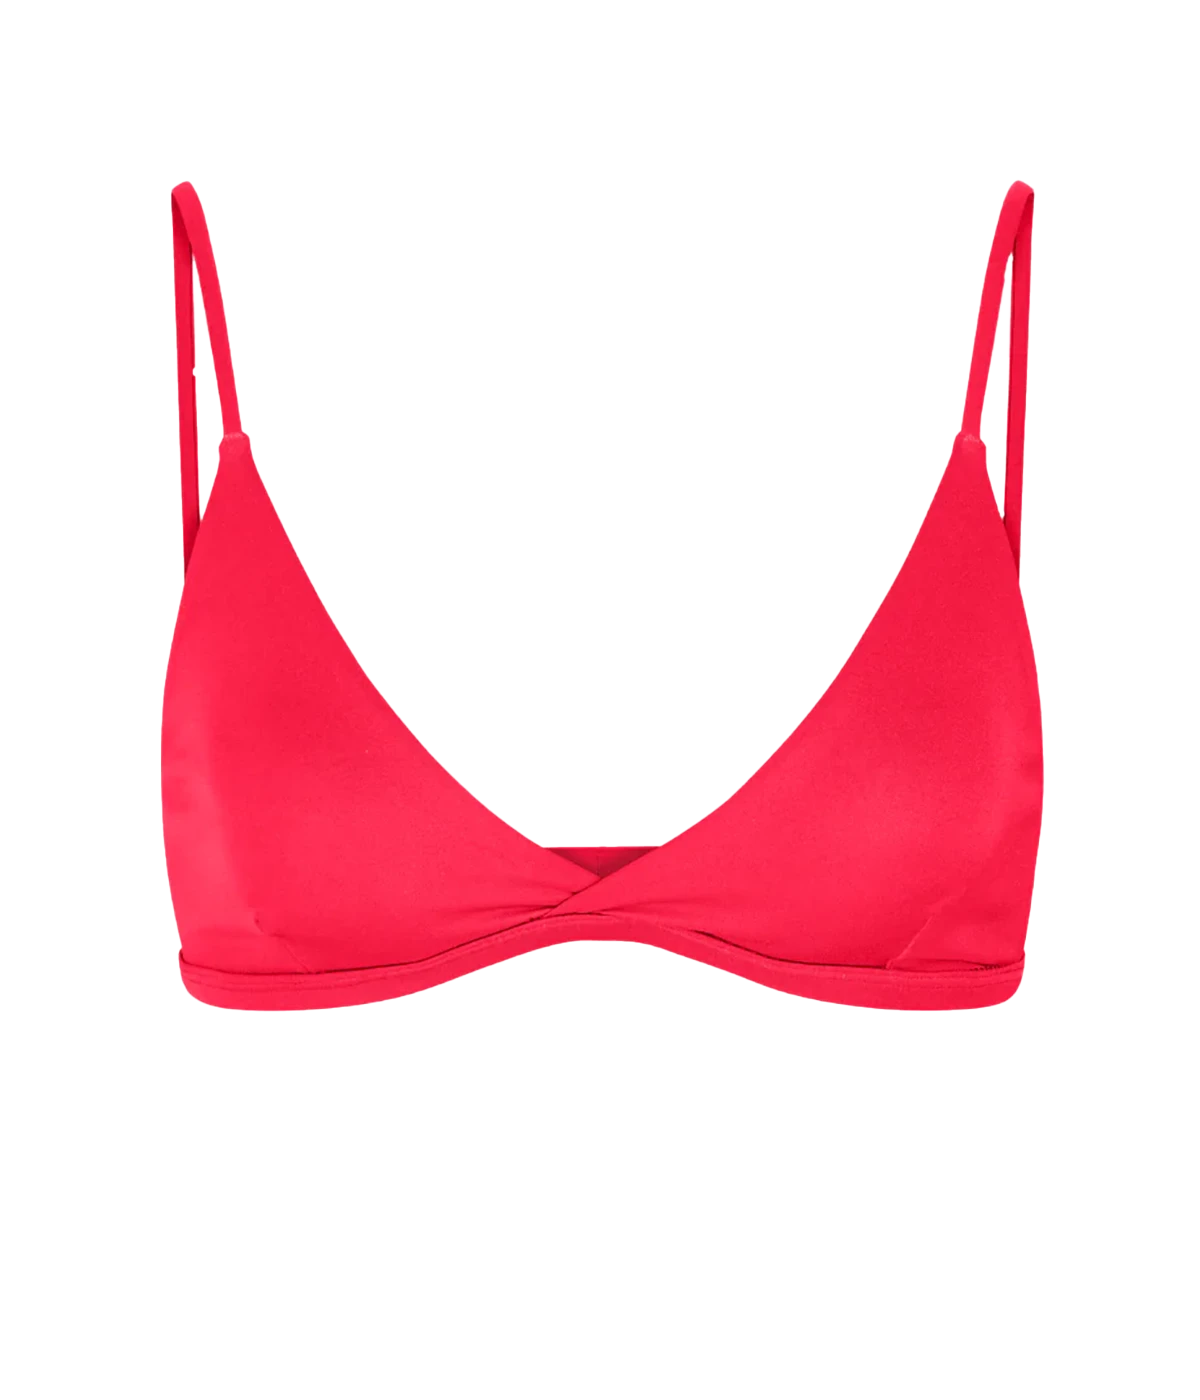 The Sweet Victory Top in Rescue is a bikini with minimal coverage in a neon red colour. It lifts and separates, holding the bust in. Perfect for tanning at the beach or the pool, or worn as a bralette all day. 